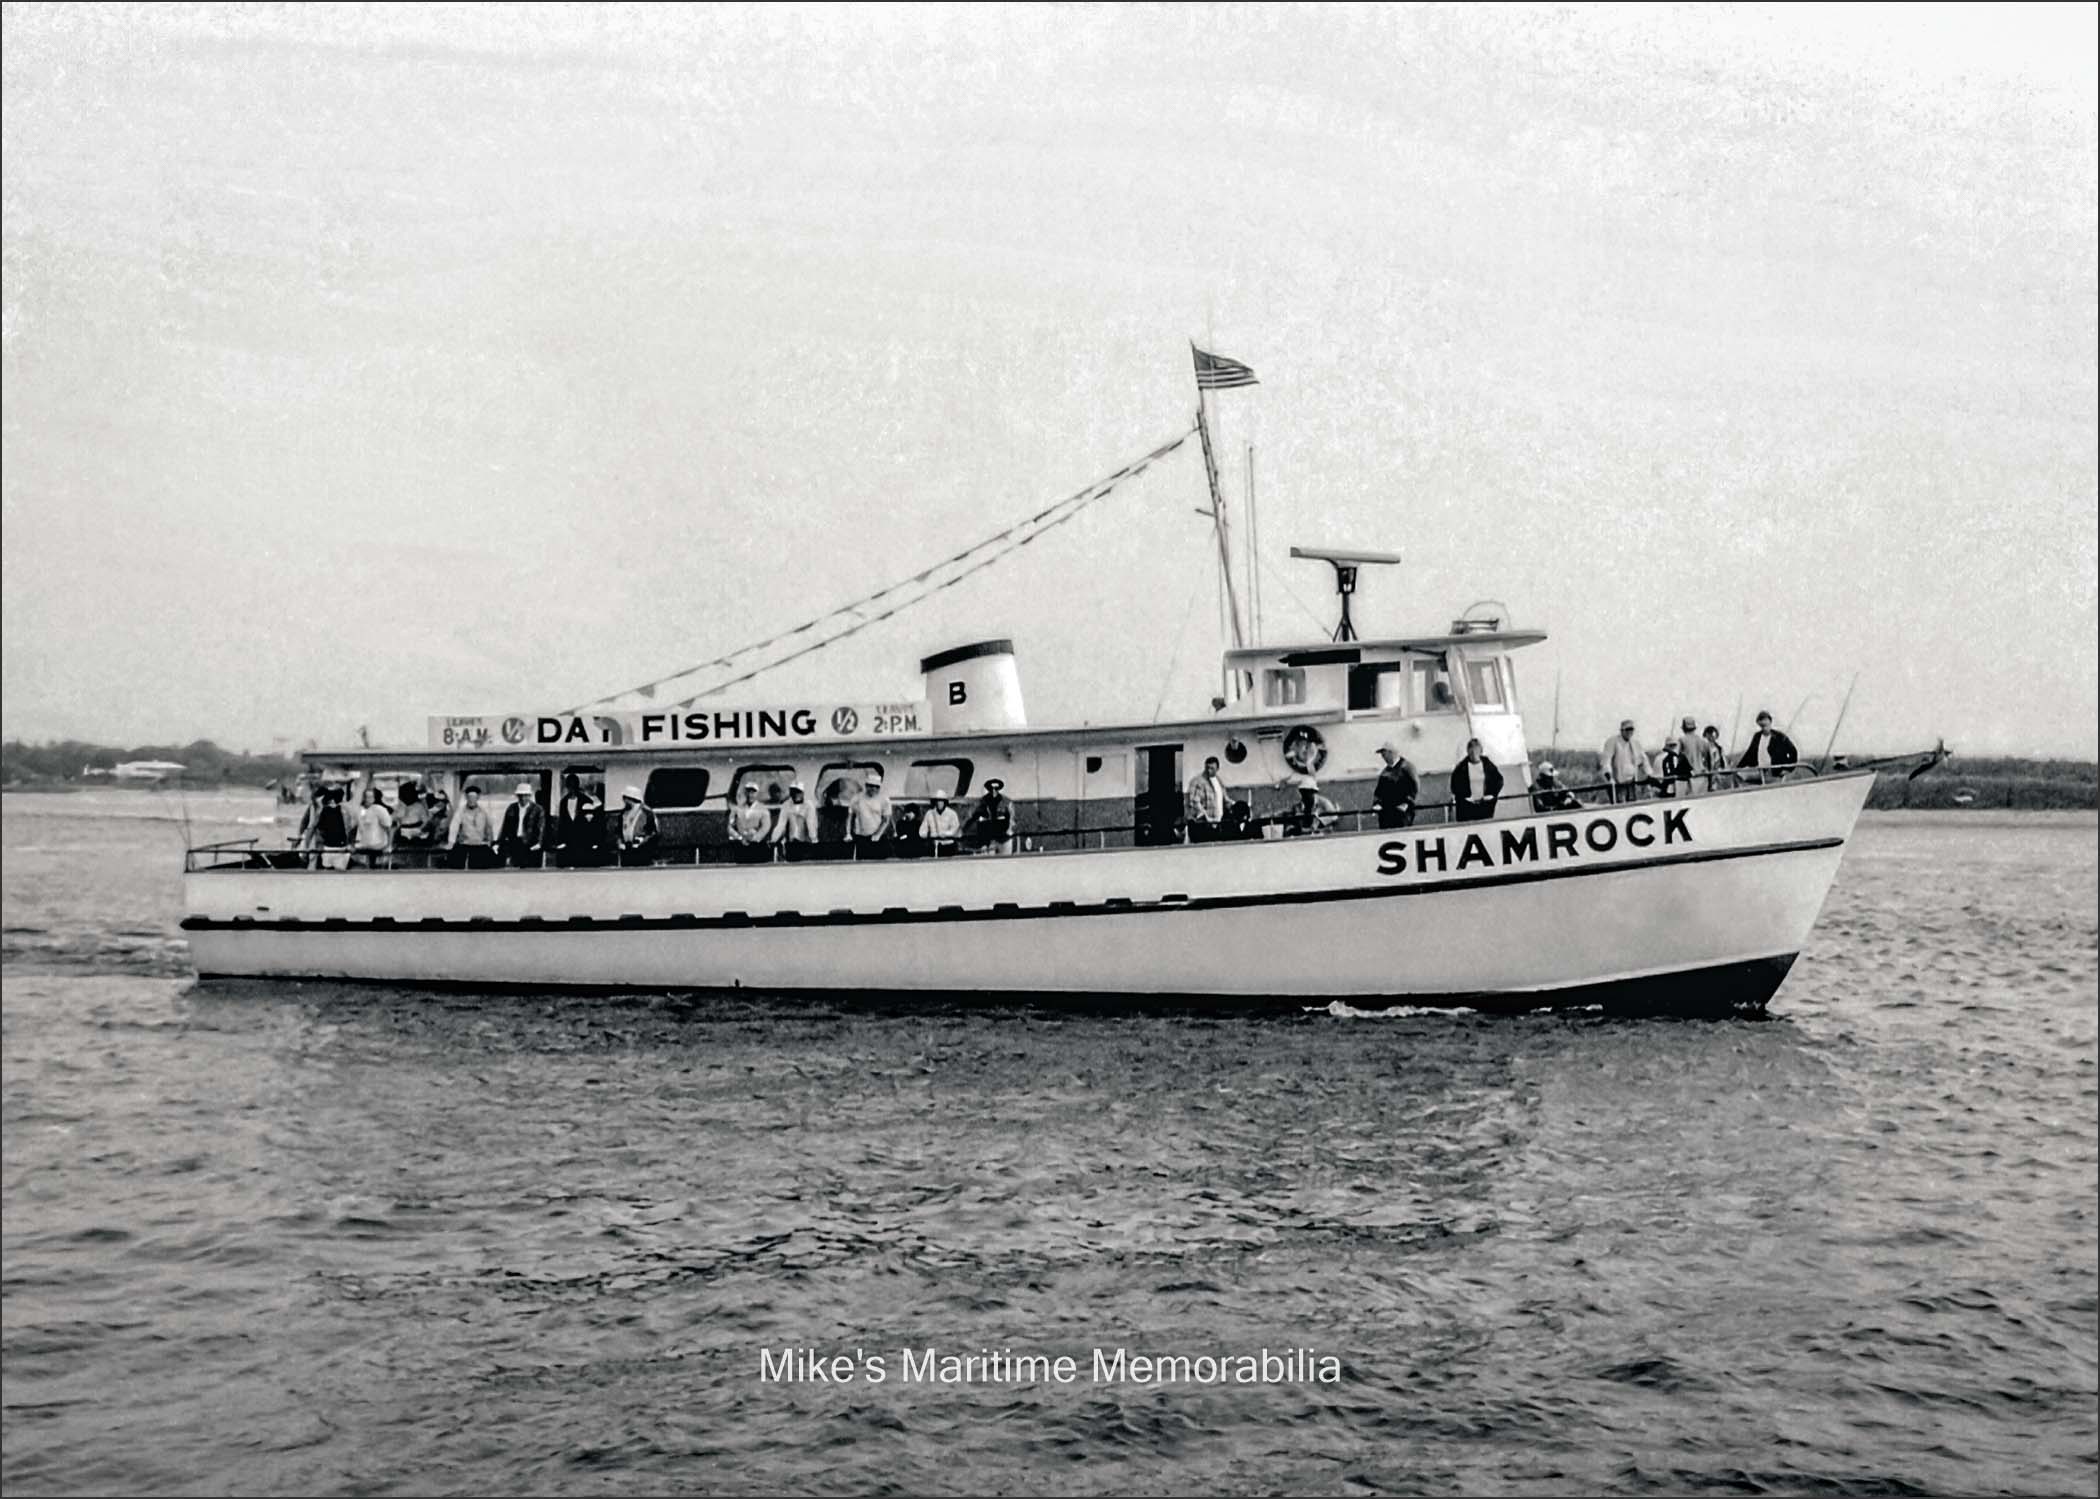 SHAMROCK, Point Pleasant Beach, NJ – 1975 Captain 'Jack' Bogan's "SHAMROCK" from Point Pleasant Beach, NJ circa 1975. Sutton Boat Works built this steel hulled vessel in 1966 at Tarpon Springs, FL and she first sailed as Bill Ennis' "CAPTAIN BILL II" from Tarpon Springs, FL. After sailing as 'Jack' Bogan's "SHAMROCK", she was sold in 1984, relocated to Sheepshead Bay, Brooklyn, NY and sailed as Mickey Hipper's "SHAMROCK". The federal government confiscated the "SHAMROCK" in 1985 and later sold her at auction. She has since been completely remodeled and is presently sailing on the St. Croix River as the dinner cruise vessel "AFTON PRINCESS" from Afton, MN. The photo is courtesy of Captain 'Jack' Bogan Sr.